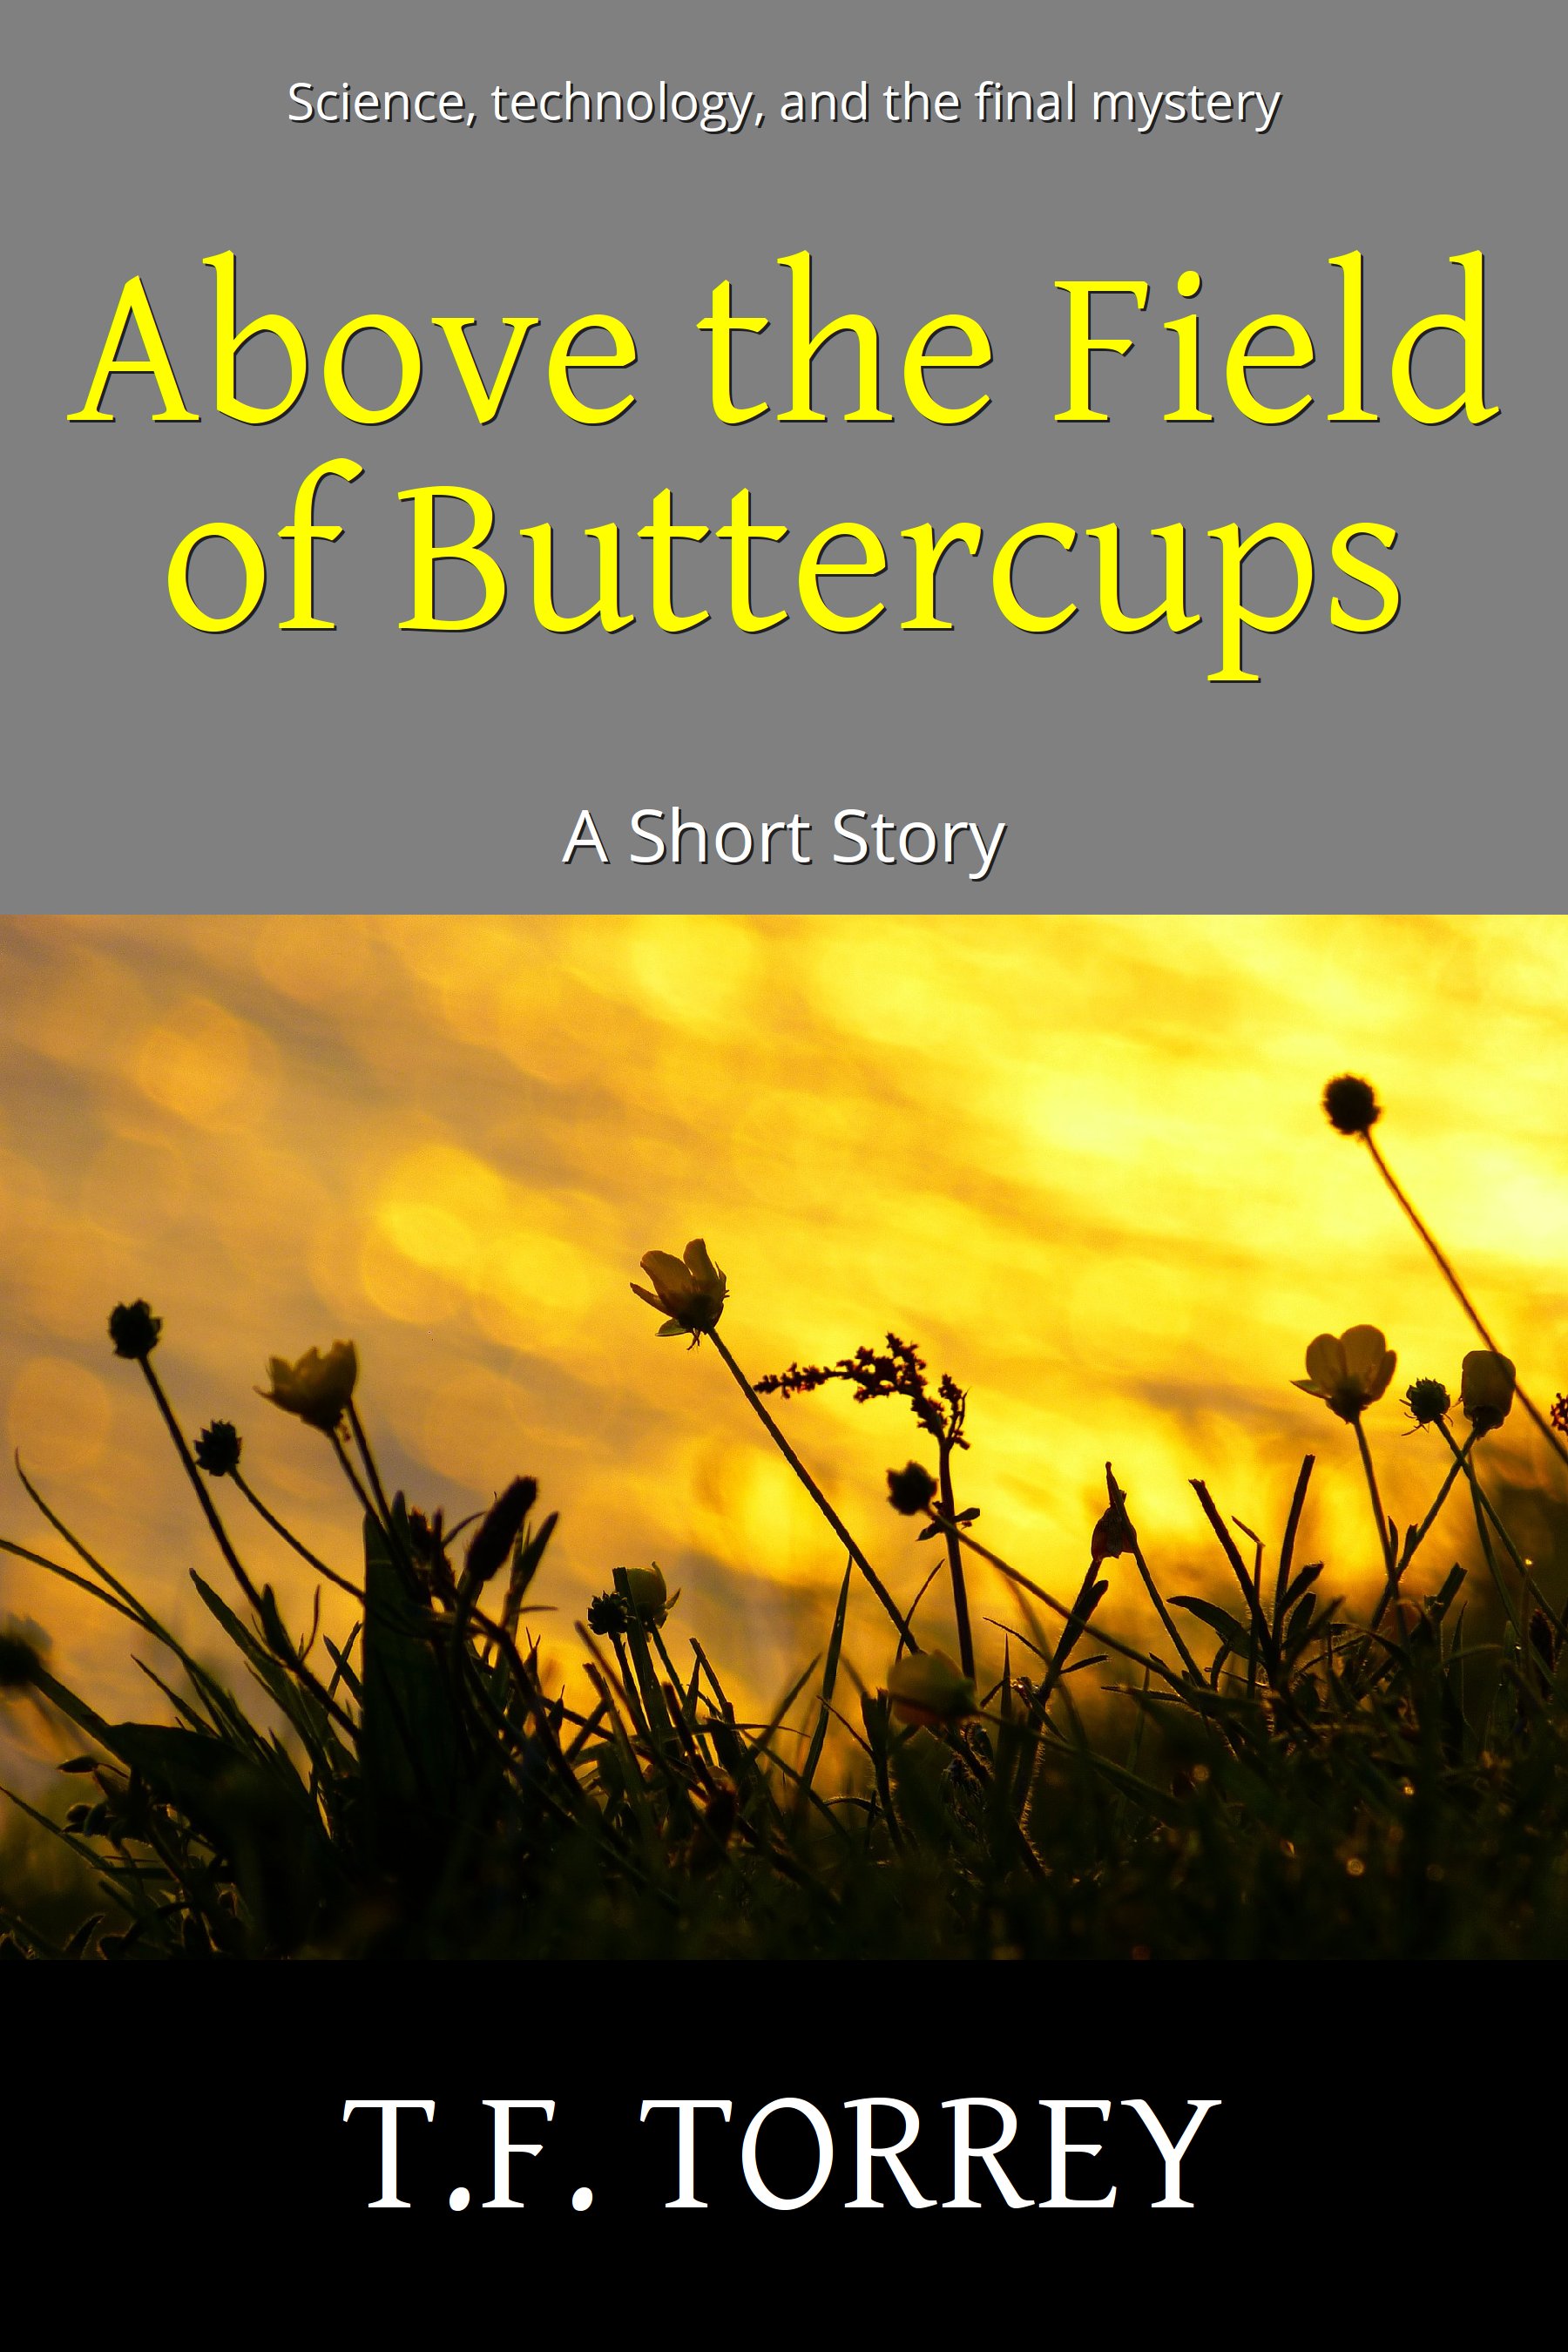 Cover of Above The Field of Buttercups, a short story by T.F. Torrey